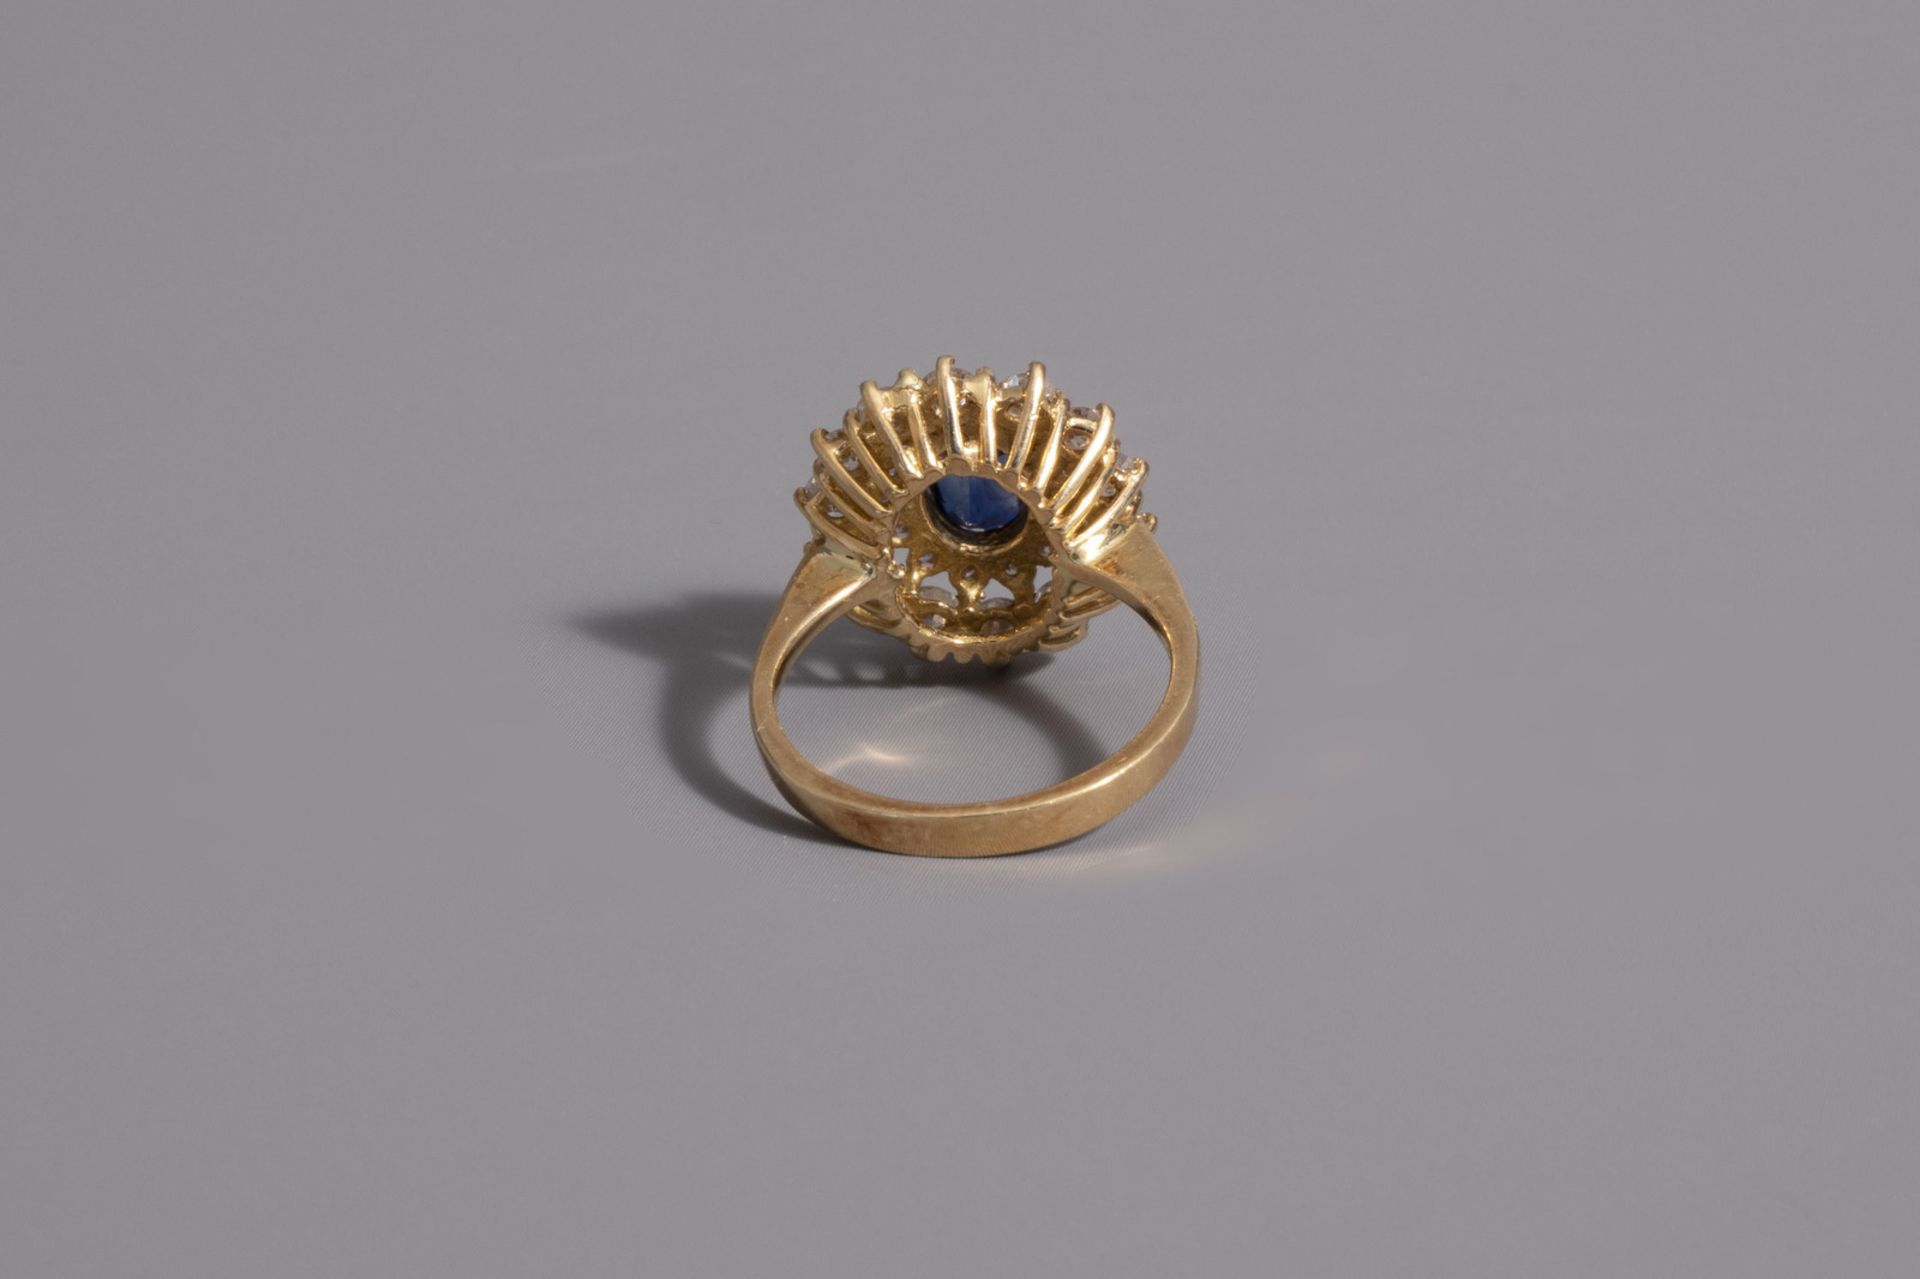 An 18 carat yellow gold ring set with a blue sapphire and 28 diamonds, 20th C. - Image 3 of 3